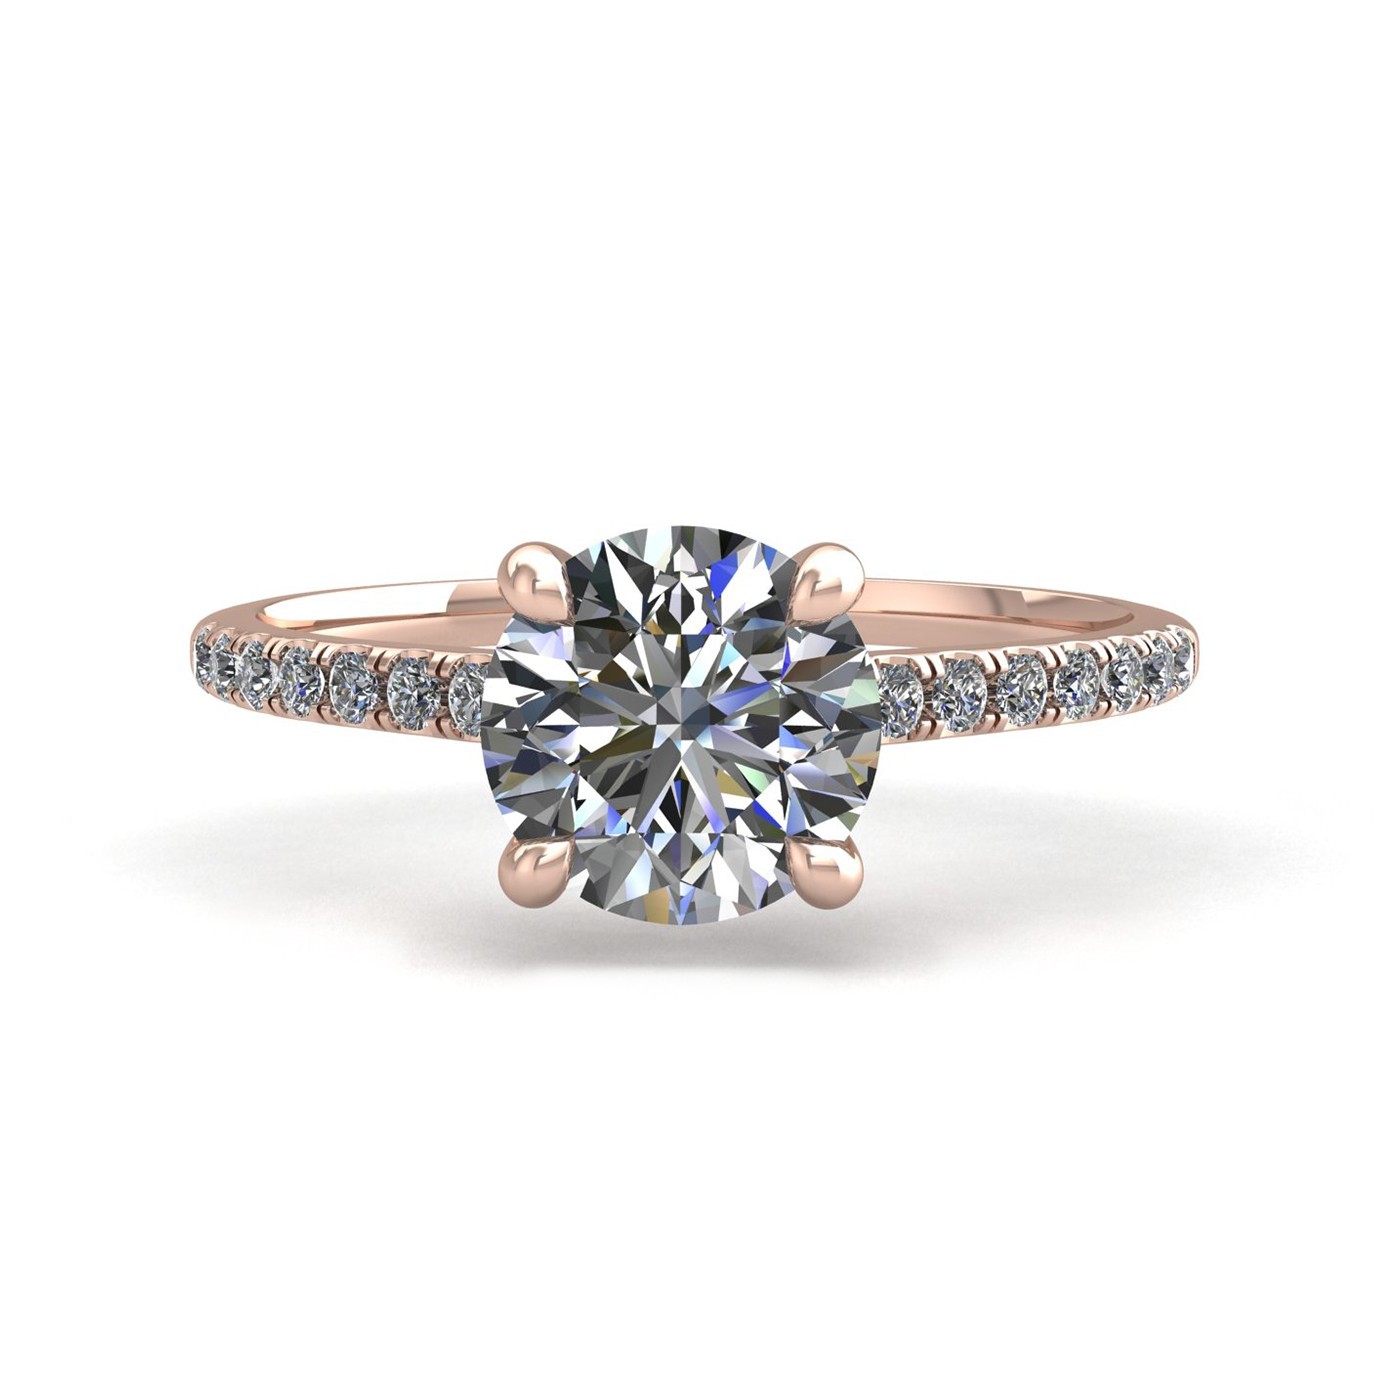 18k rose gold 0,80 ct 4 prongs round cut diamond engagement ring with whisper thin pavÉ set band Photos & images